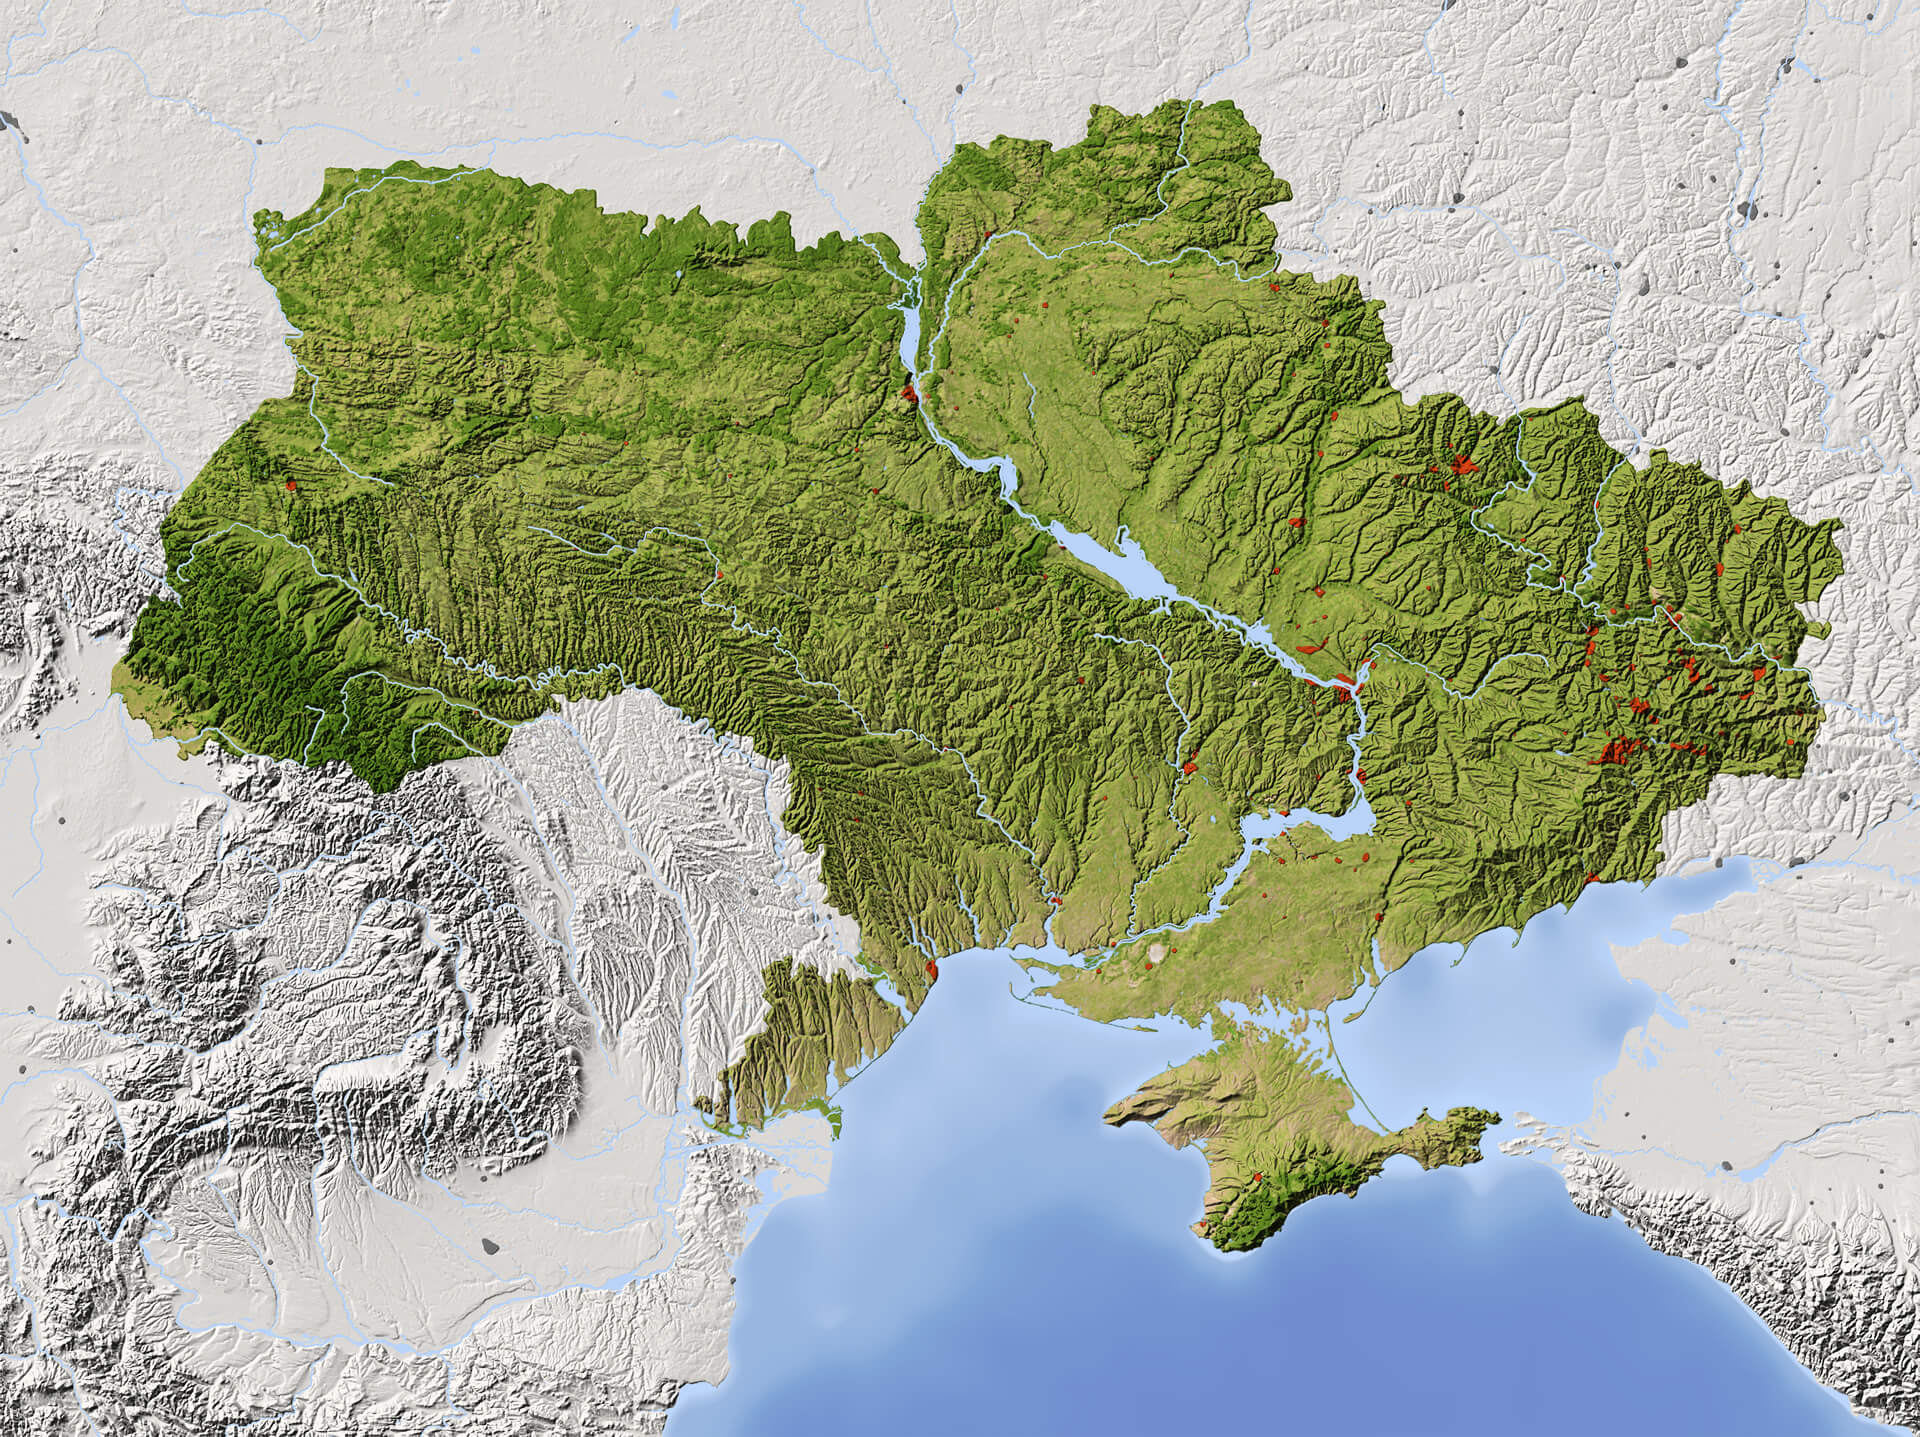 Shaded Relief Map of Ukraine